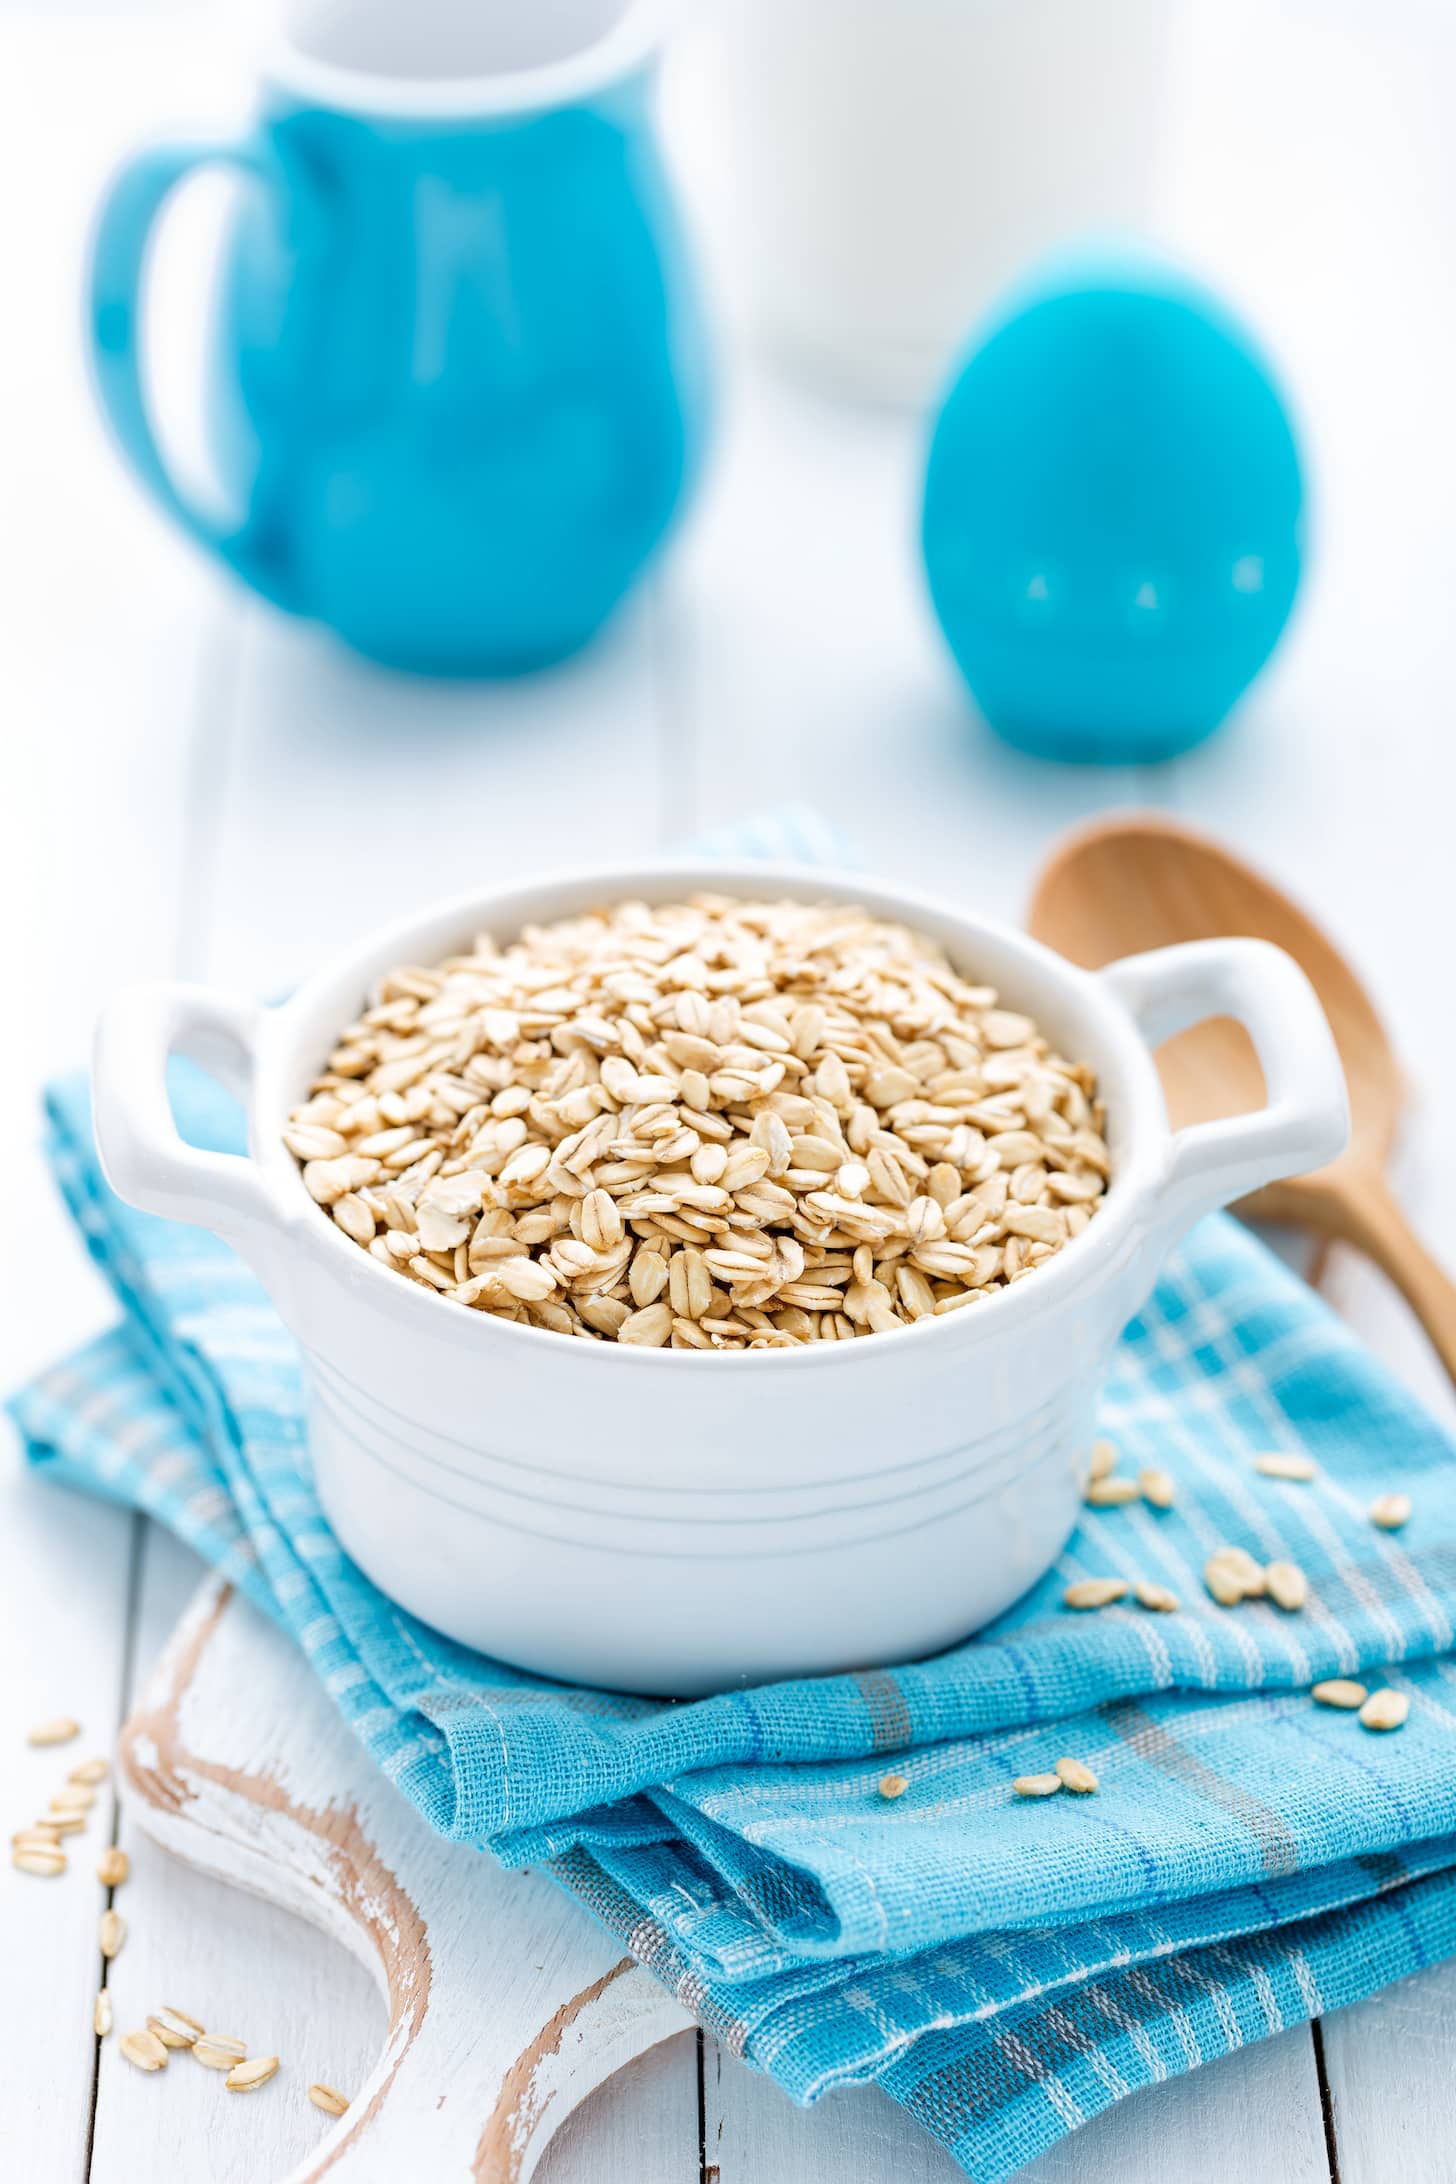 Rolled oats on white wooden background.